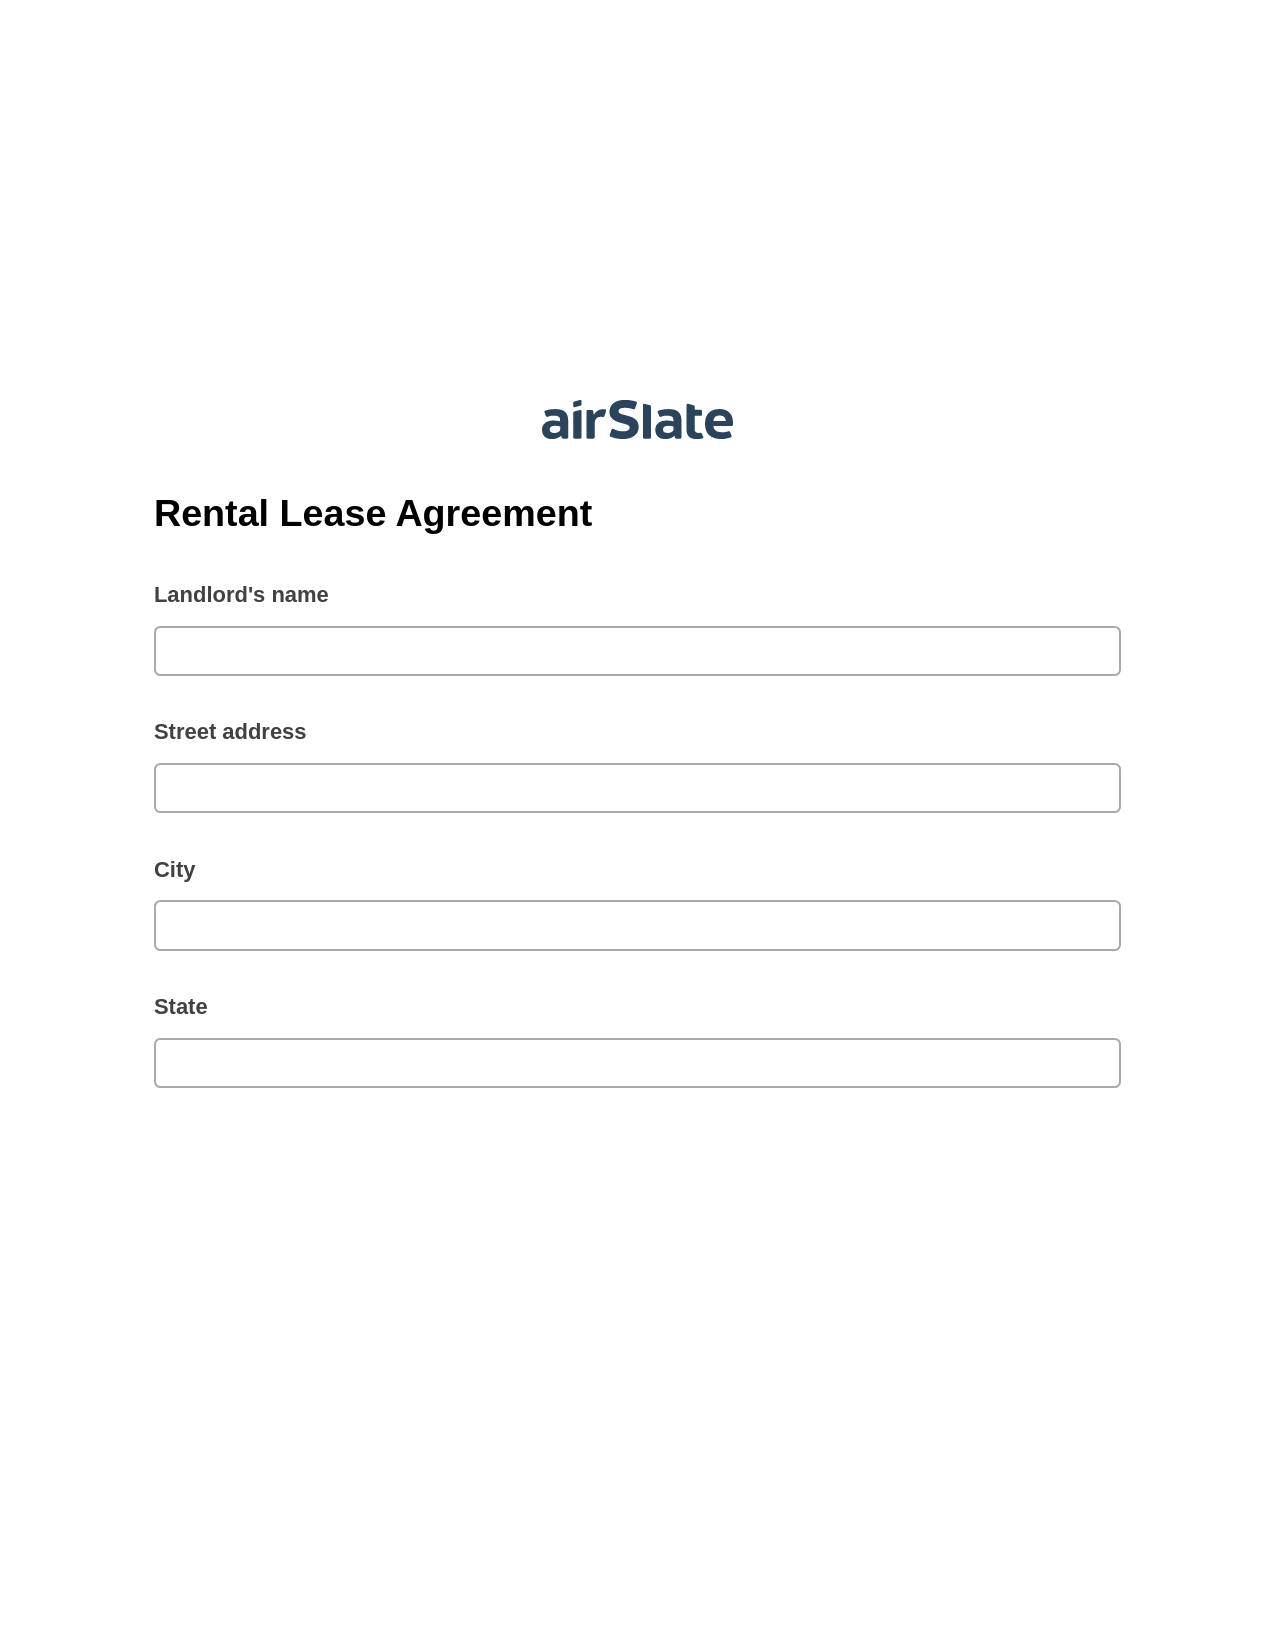 Rental Lease Agreement Pre-fill from CSV File Dropdown Options Bot, Invoke Salesforce Process Bot, Email Notification Postfinish Bot